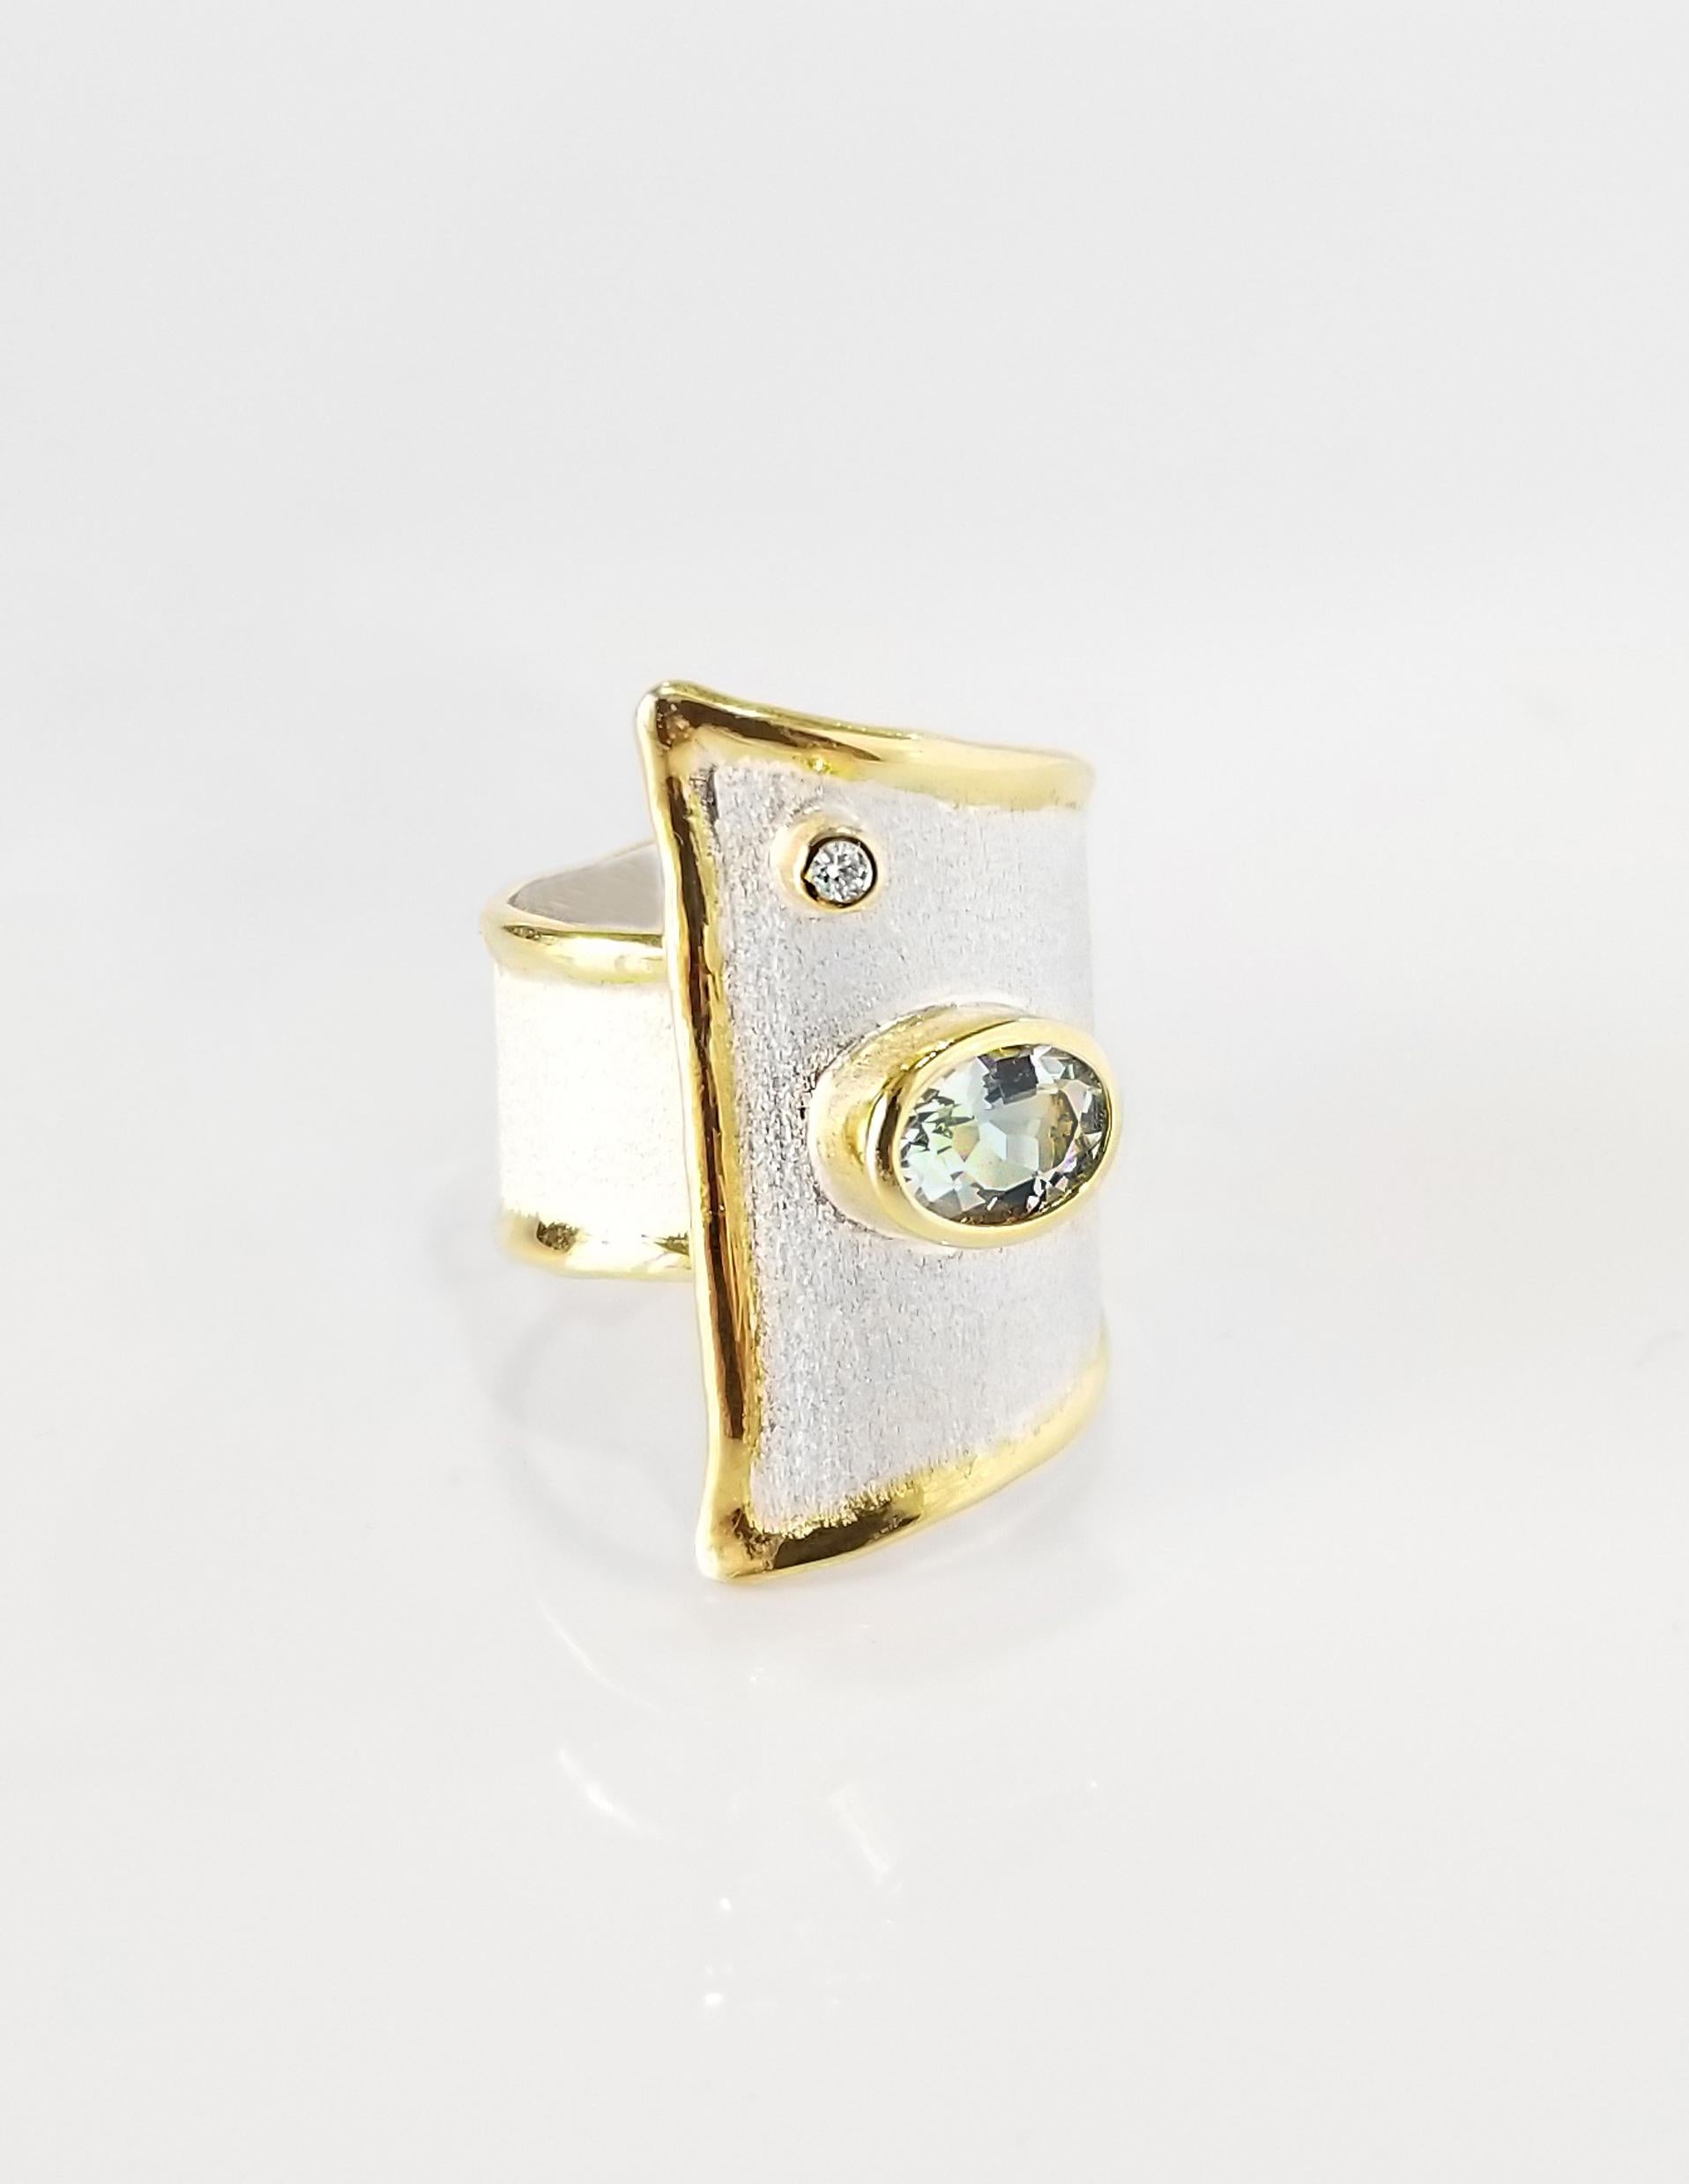 Yianni Creations artisan silver ring from Midas Collection handcrafted in Greece. This adjustable ring is plated with palladium to resist elements and the edges are decorated with an overlay of 24 Karat Yellow Gold and feature 1.10 Carat aquamarine